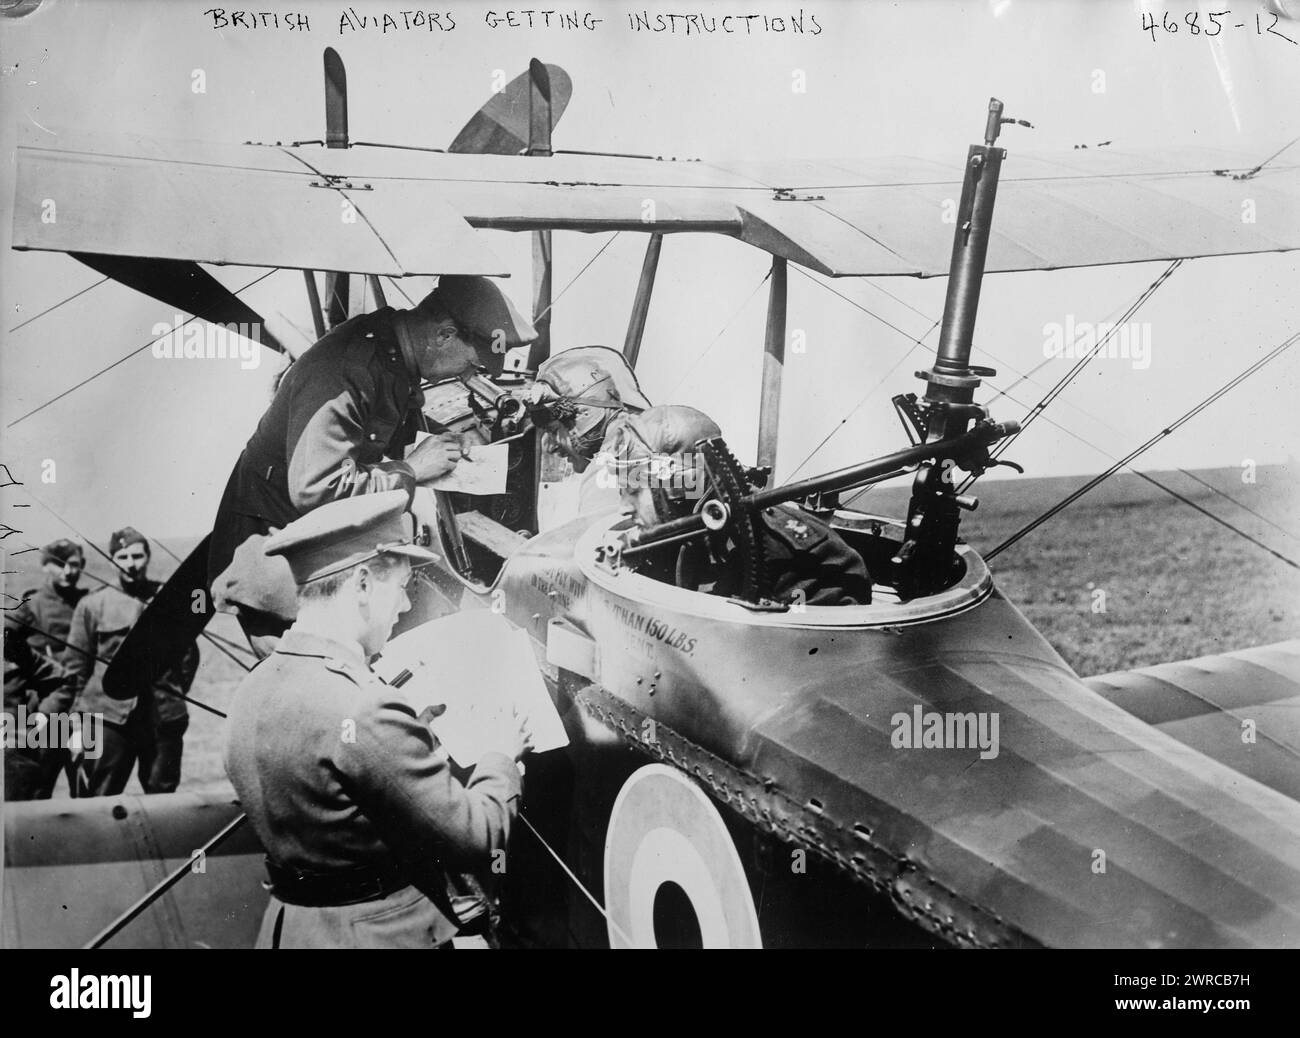 British aviators getting instructions, Photograph shows the the pilot and observer of a Royal Aircraft Factory R.E.8 biplane (serial number B5106) of No. 59 Squadron receiving instructions from Major Charles Jospeh Mackay before taking off from the Vert-Galland Aerodrome, France, May 15, 1918. The observer's Lewis gun is on a Scarff ring., 1918 May 15, World War, 1914-1918, Glass negatives, 1 negative: glass Stock Photo